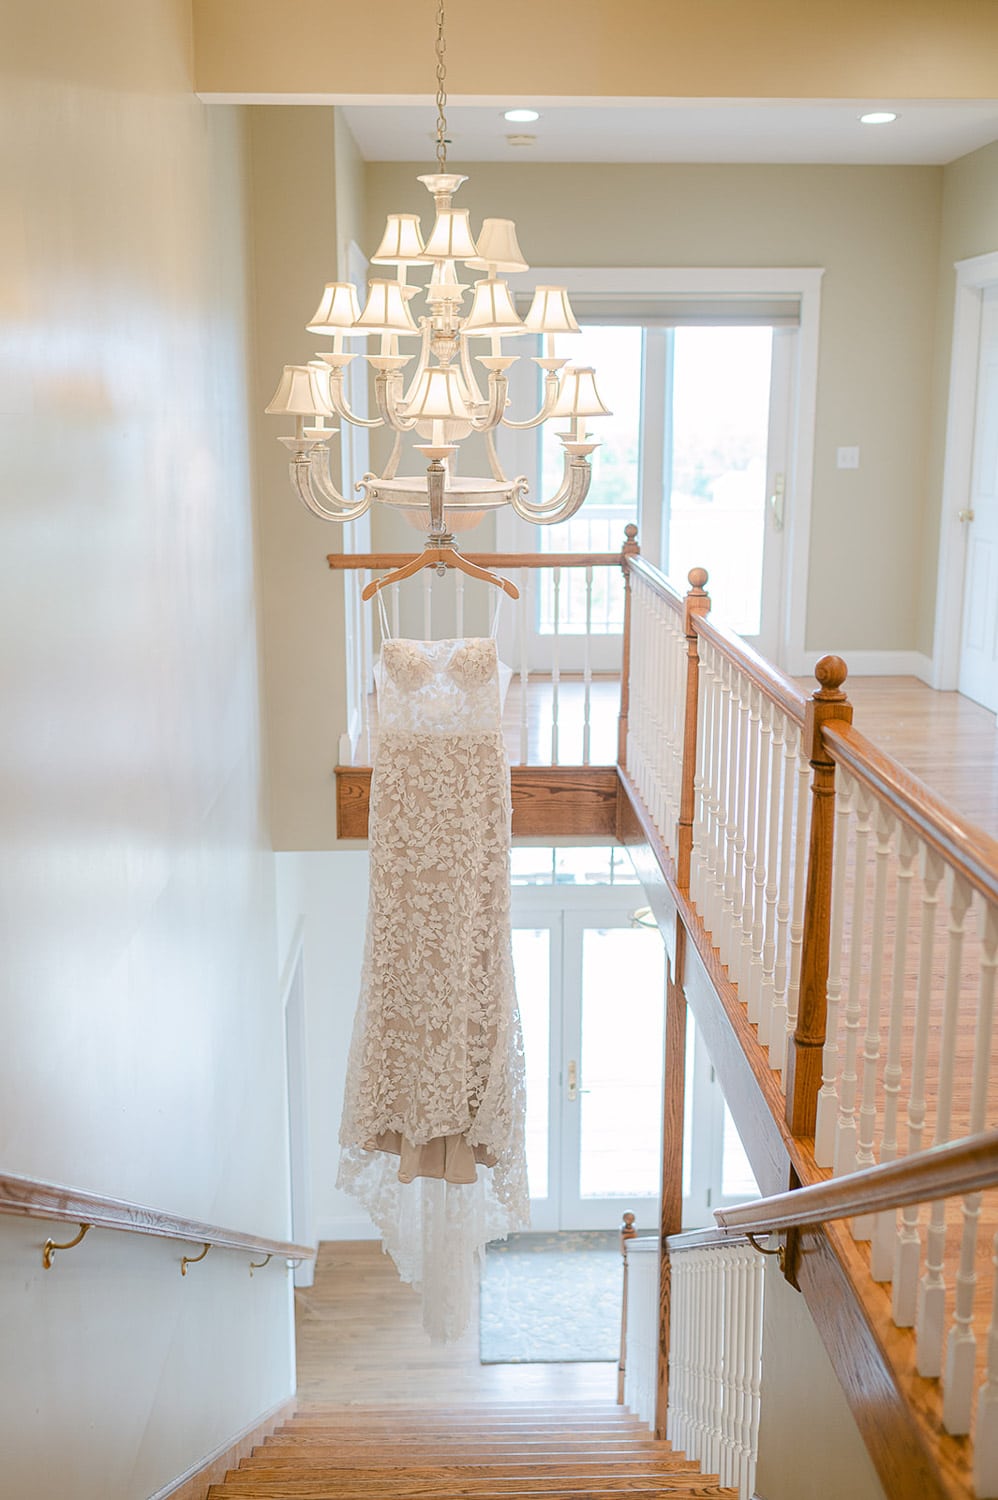 A lace wedding dress hangs from an elegant chandelier in a bright hallway with wooden stairs and a white railing.